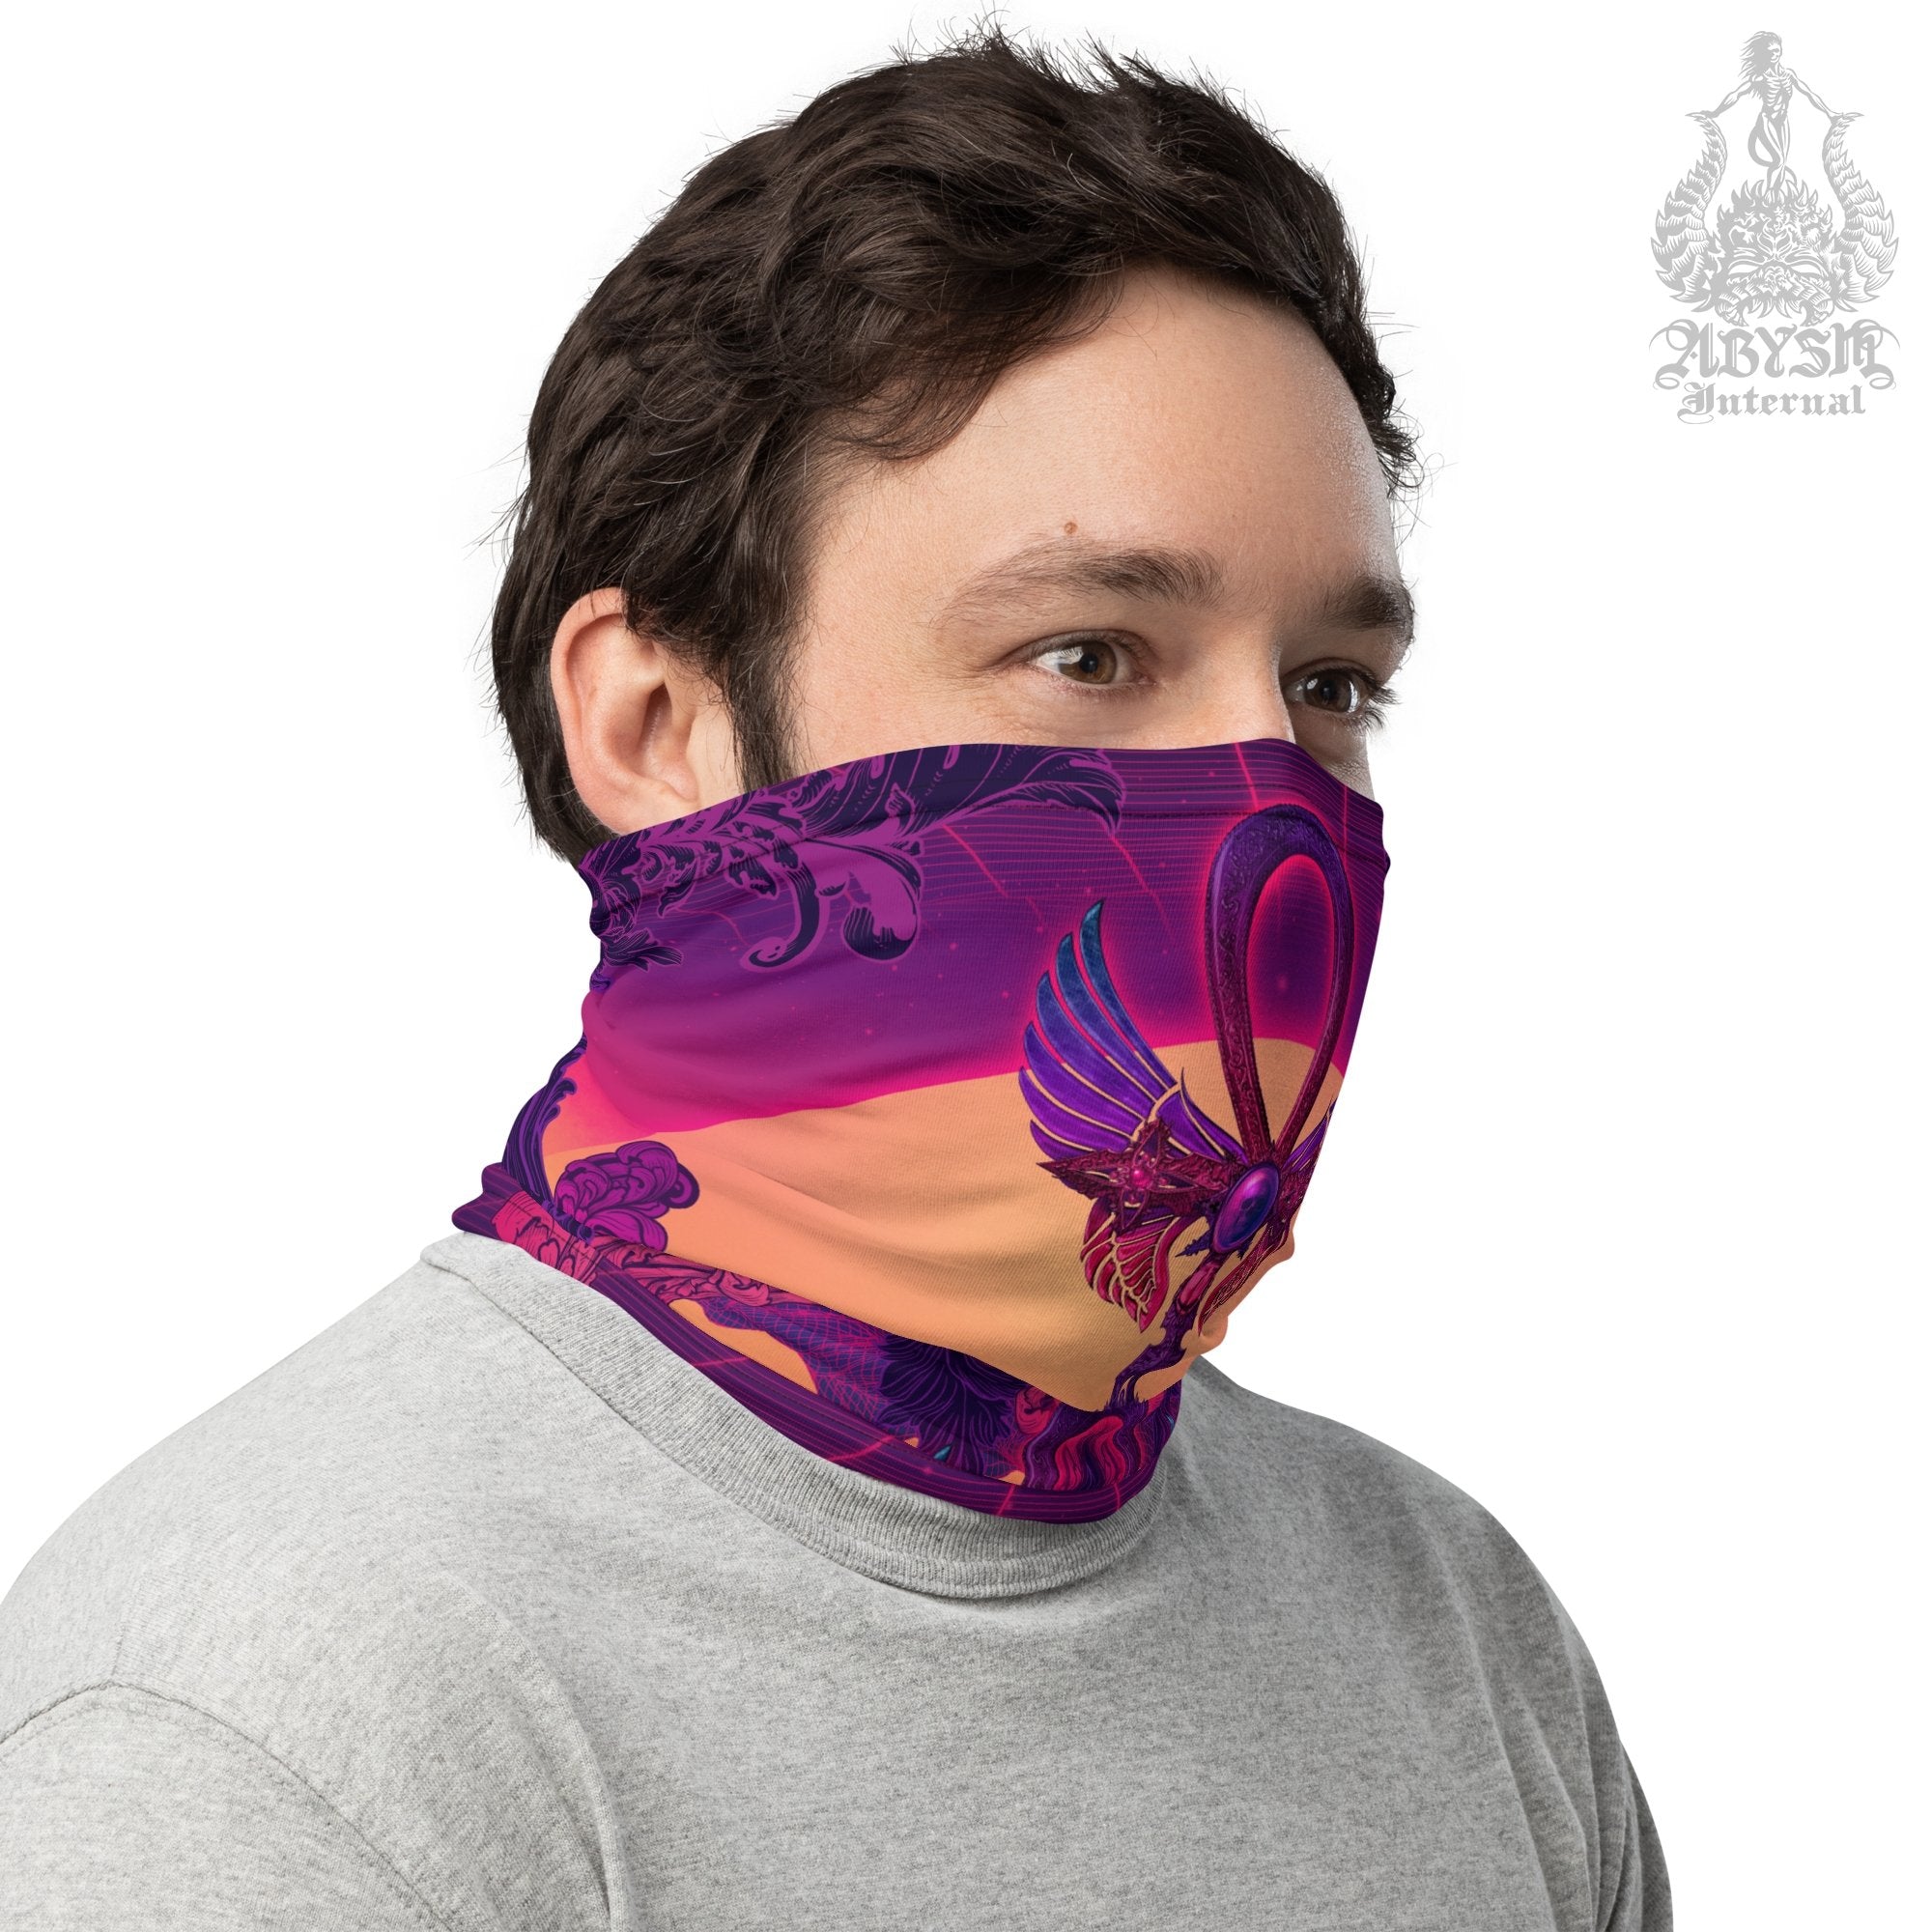 Vaporwave Neck Gaiter, Face Mask, Synthwave Head Covering, Psychedelic 80s Retrowave, Rave Festival Outfit - Ankh - Abysm Internal